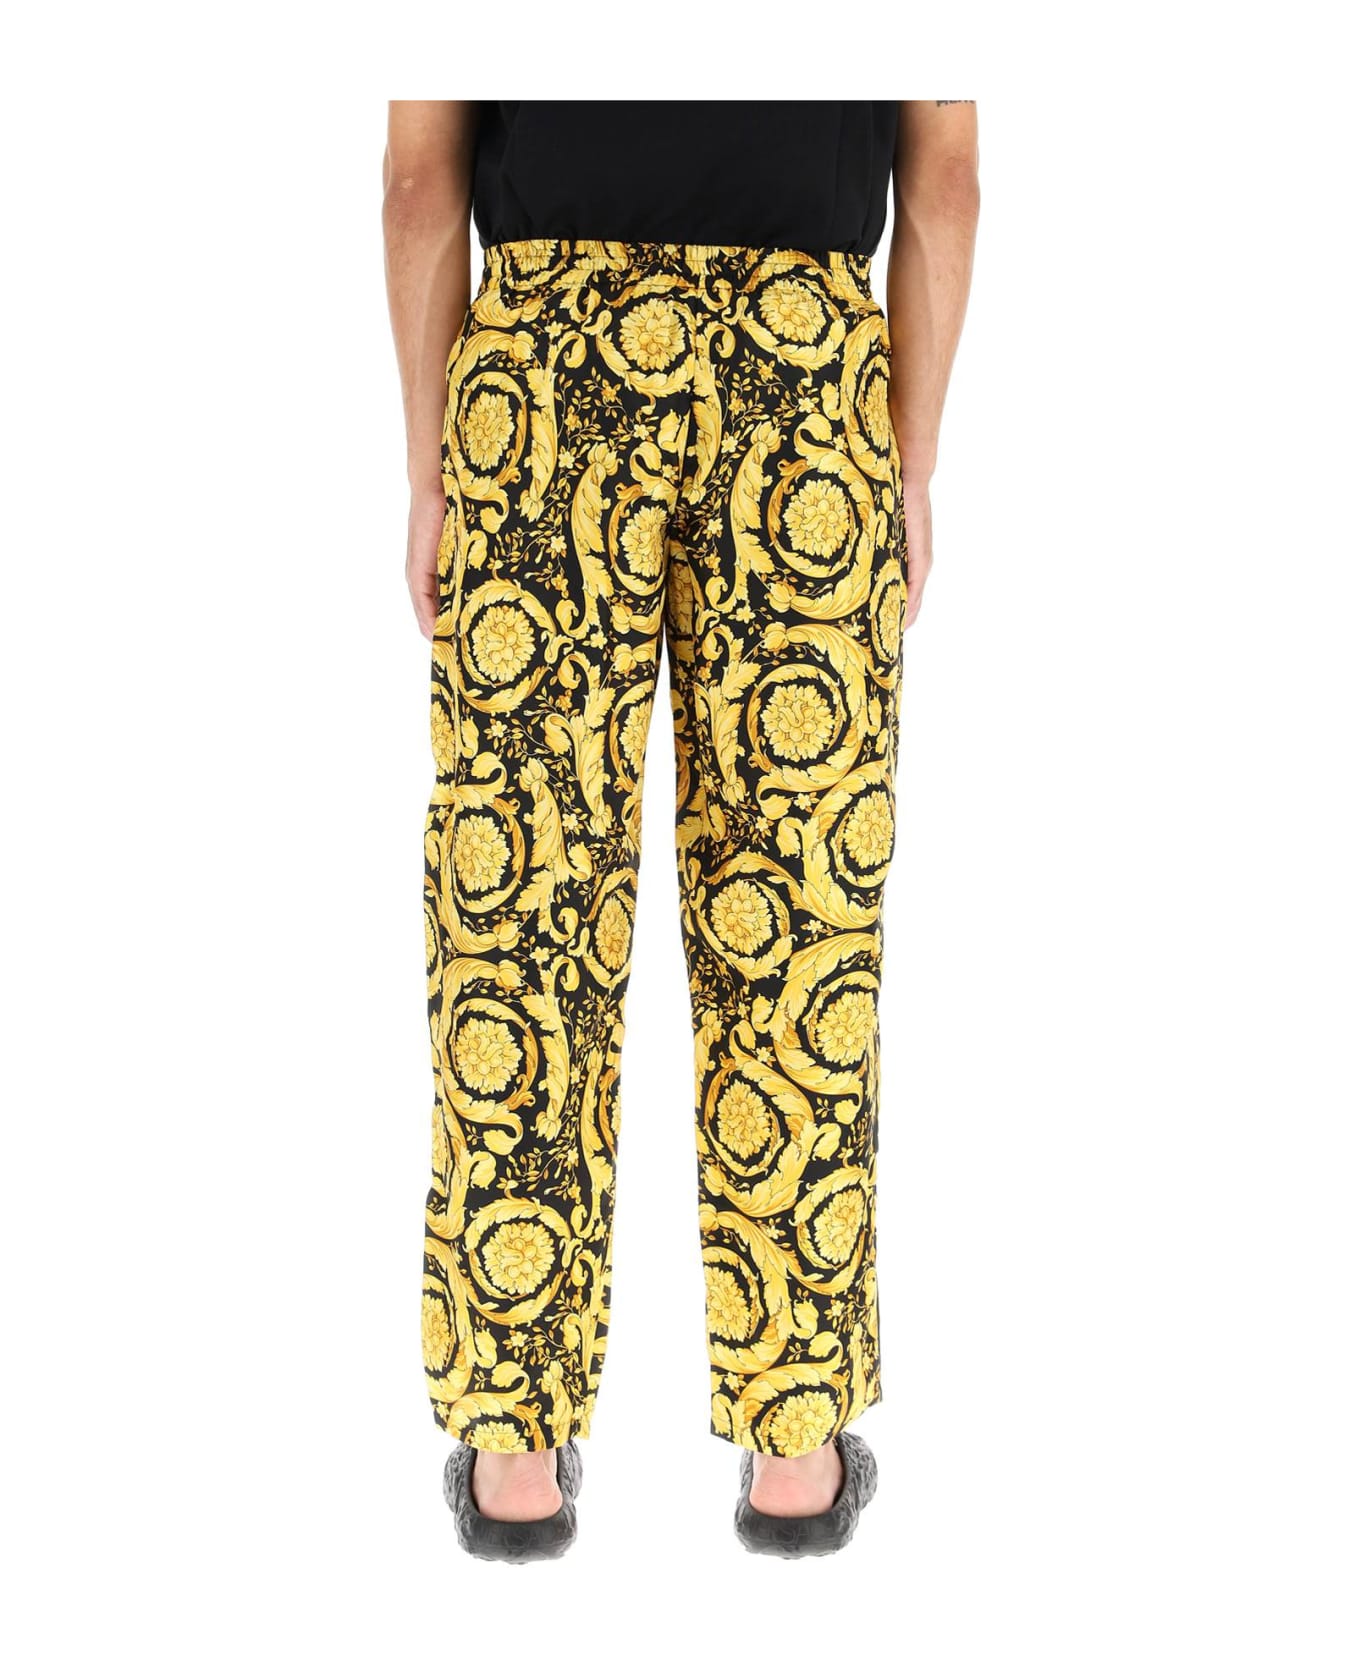 Versace Crop Printed Trousers - NERO ORO (Gold)